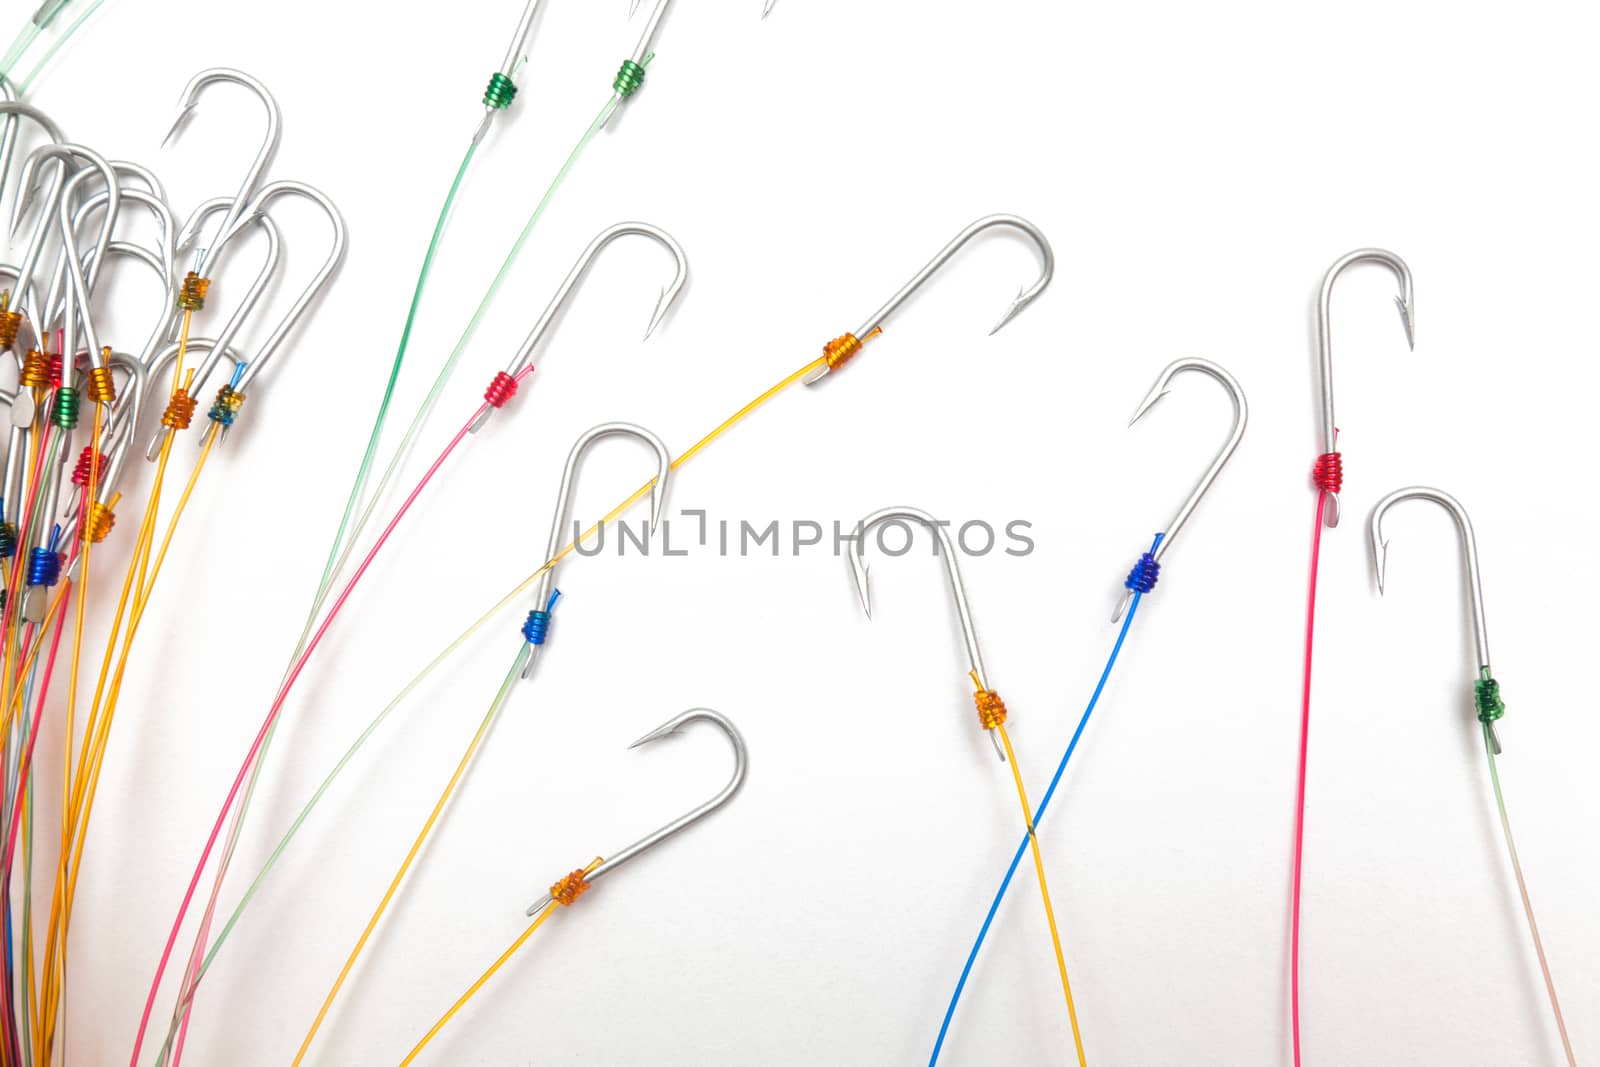 A fishing hooks tied with fishing line, isolated against a white background